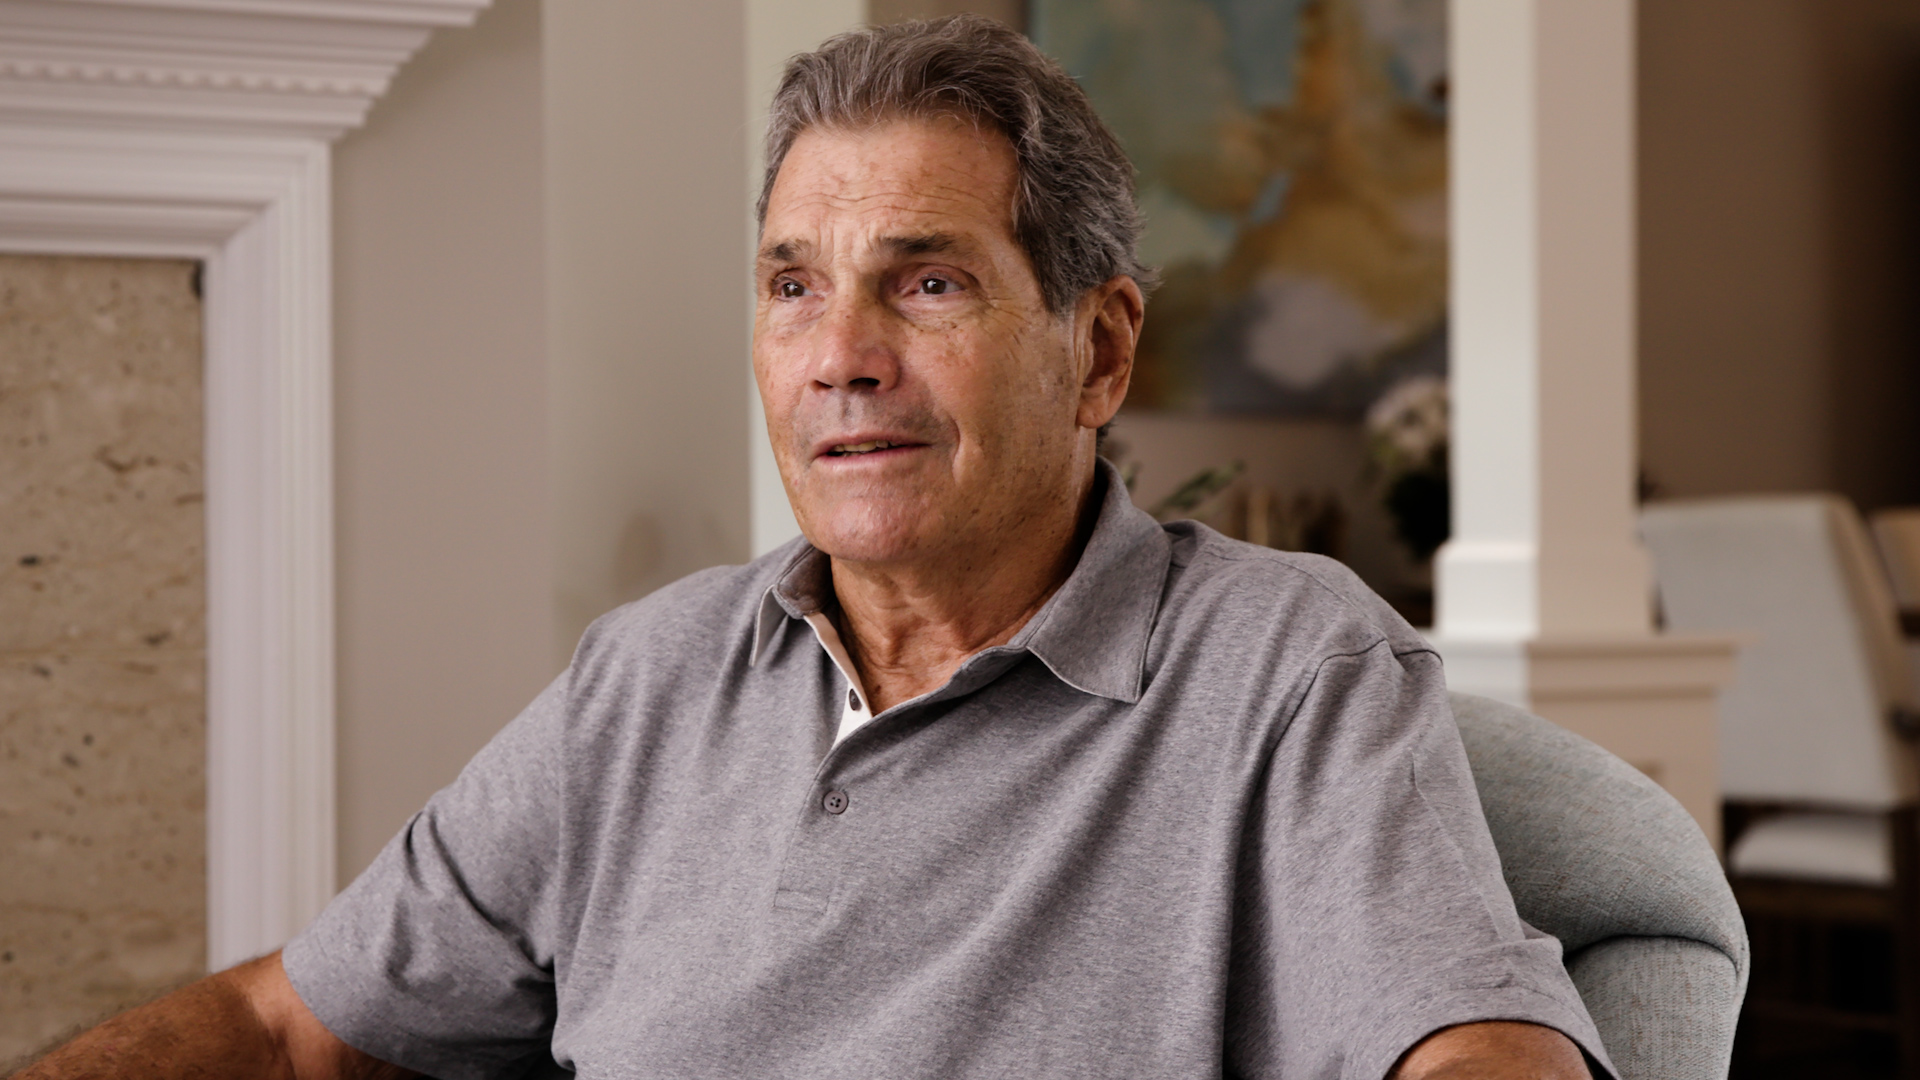 A patient story video of Jim, an adult male ABECMA® (idecabtagene vicleucel) patient